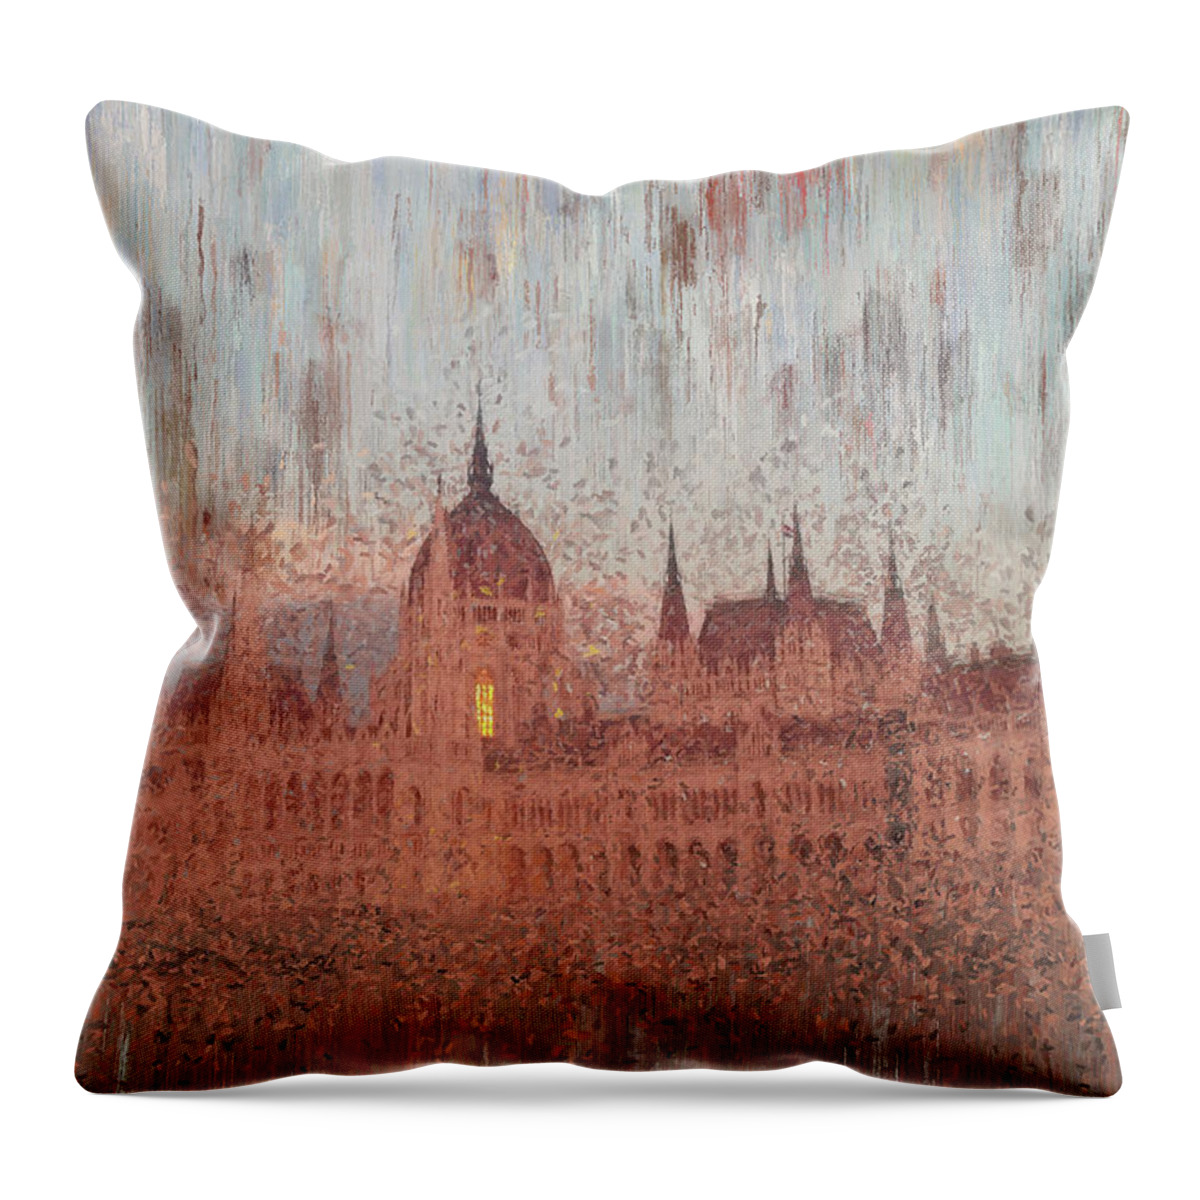 Budapest Throw Pillow featuring the painting Hungarian Parliament Building by Alex Mir